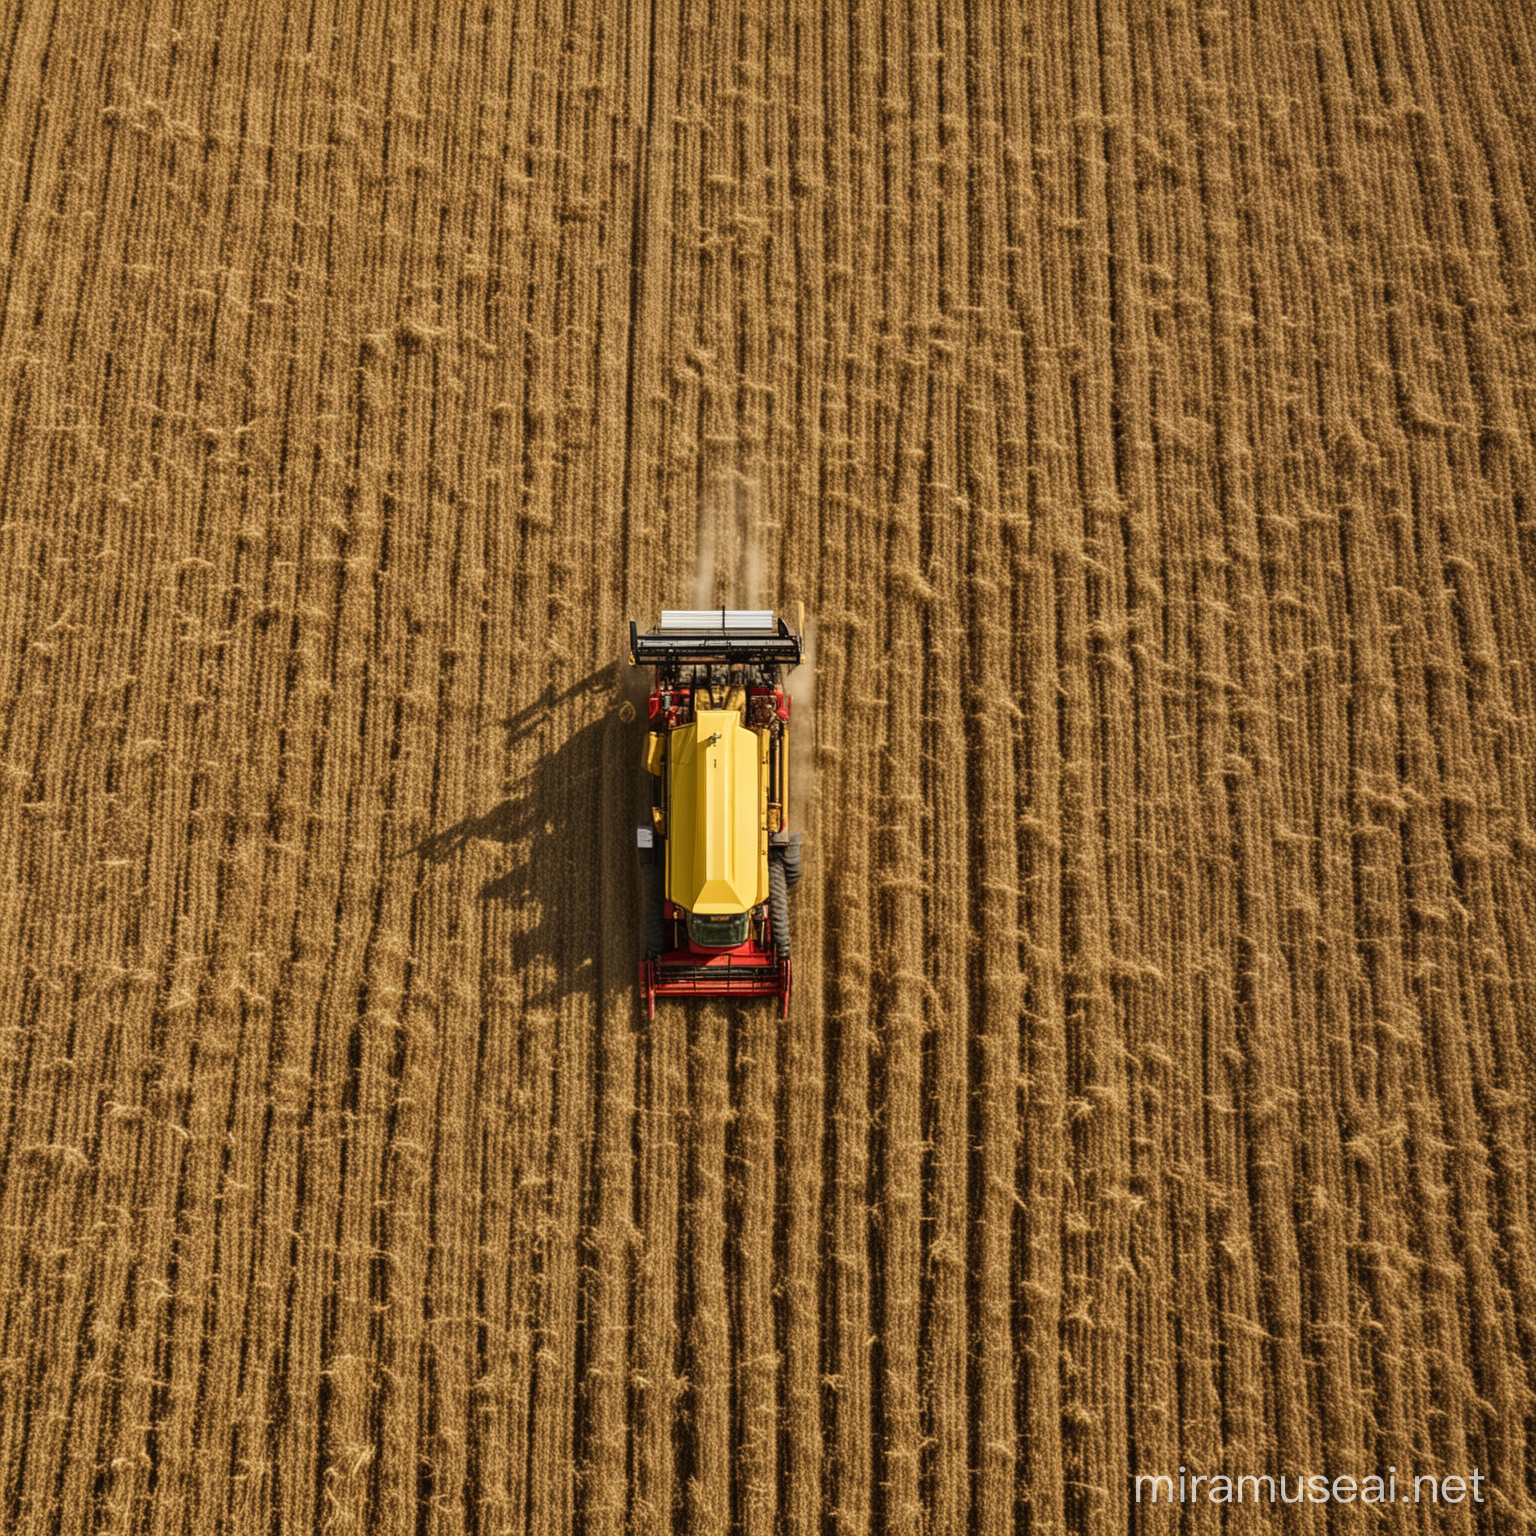 Efficient Corn Harvesting with Aerial View Combined Harvester